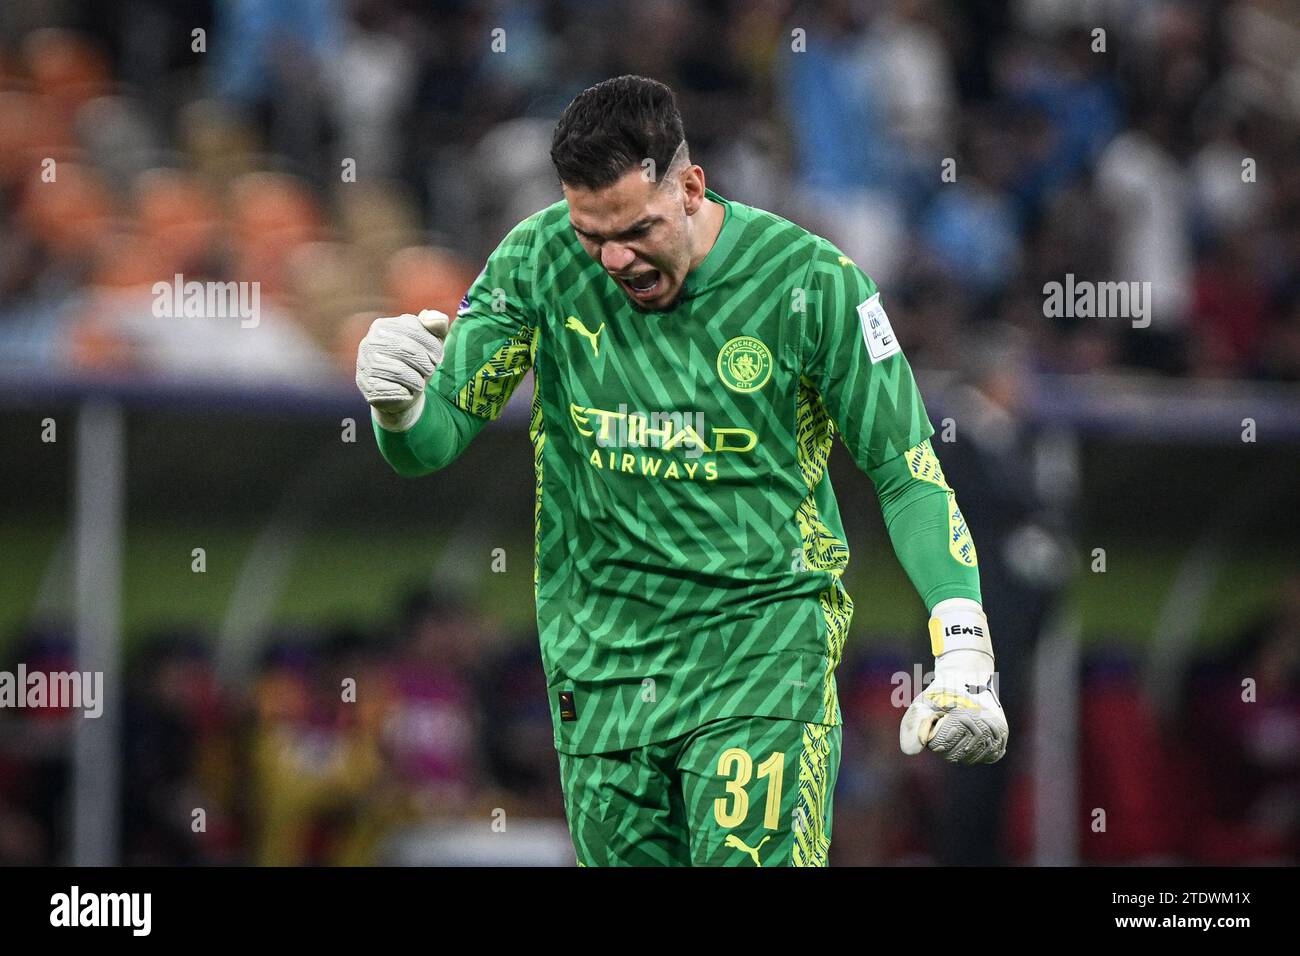 Jeddah, Saudi Arabia. 19th Dec, 2023. King Abdullah Sports City Goalkeeper Ederson Moraes of Manchester City celebrates after Manchester City score during the FIFA Club World Cup Semi Final between Urawa Reds of Japan and Manchester City of England at the King Abdullah Sports City Stadium in Jeddah, Saudi Arabia. City won the game 3-0 and will play Fluminense of Brazil in the final on Friday. (Alexandre Neto/SPP) Credit: SPP Sport Press Photo. /Alamy Live News Stock Photo